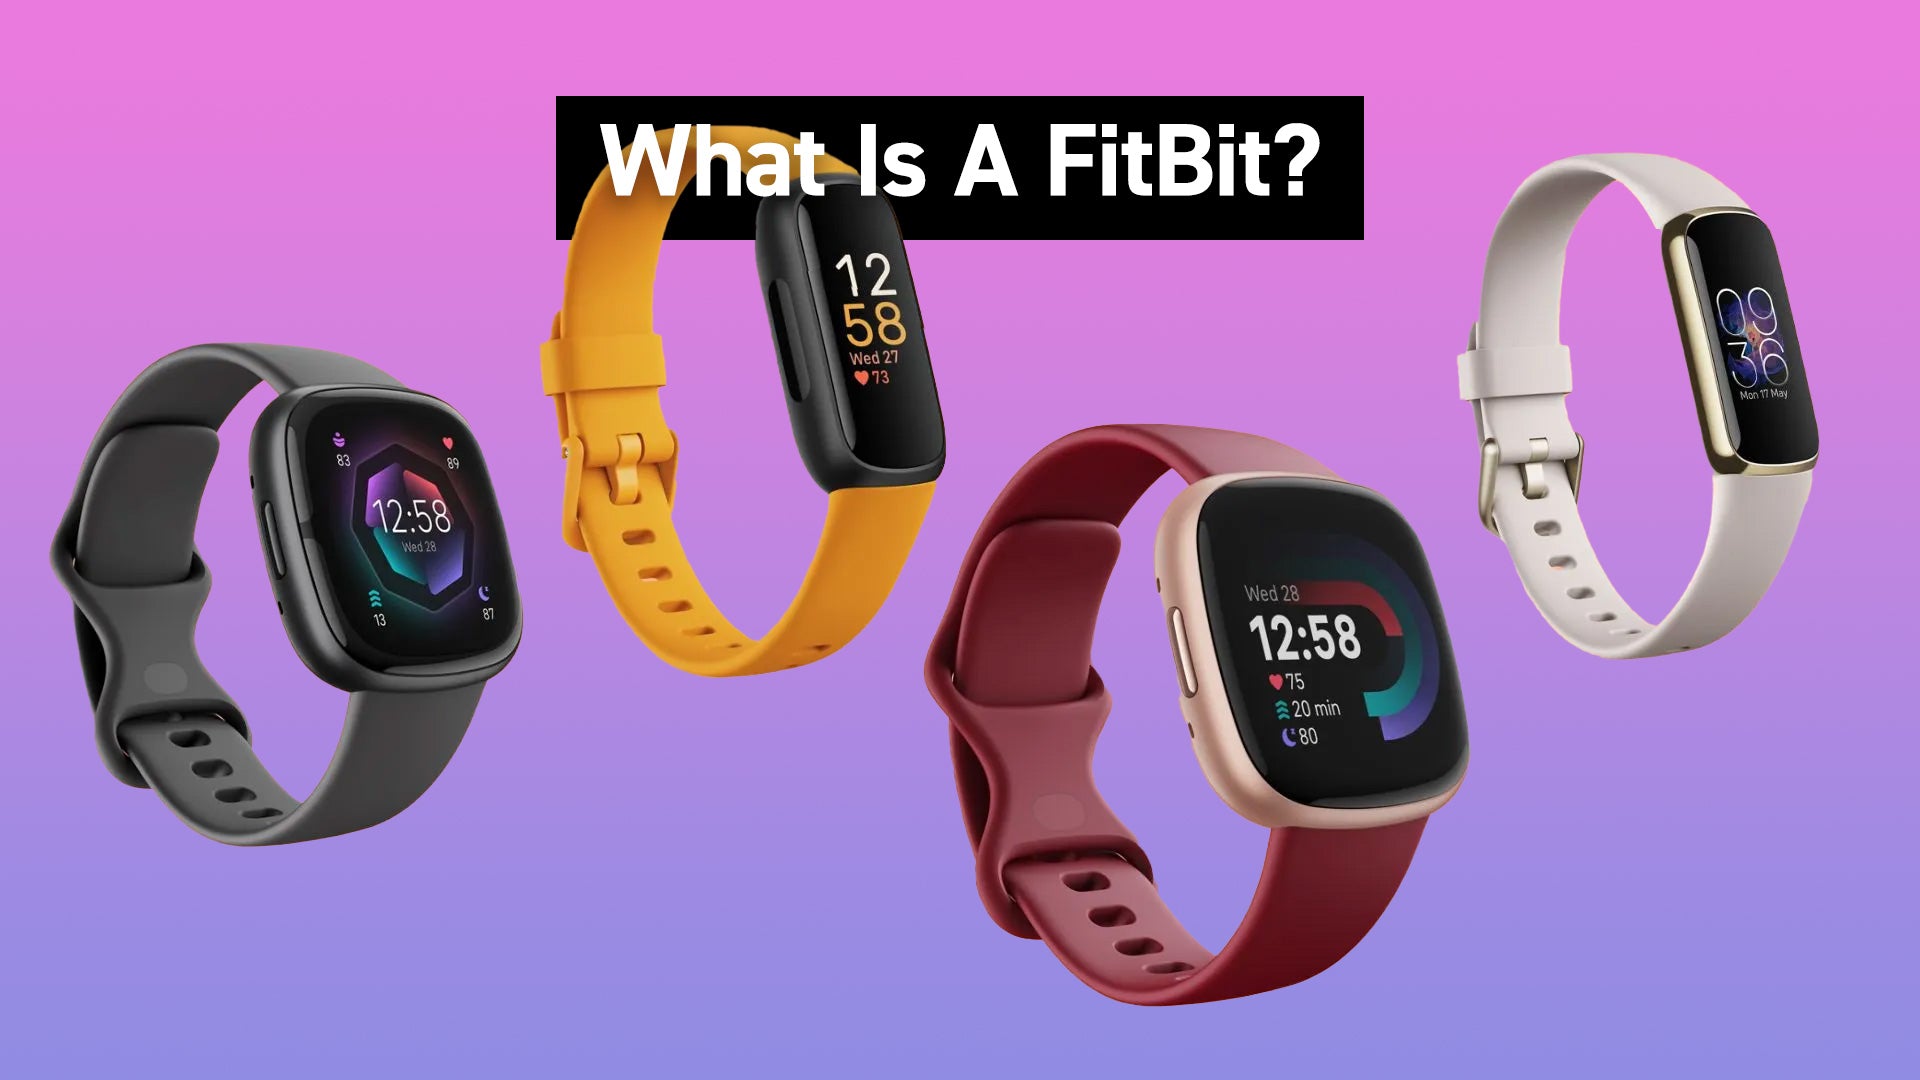 What Is A Fitbit And How Do They Work?